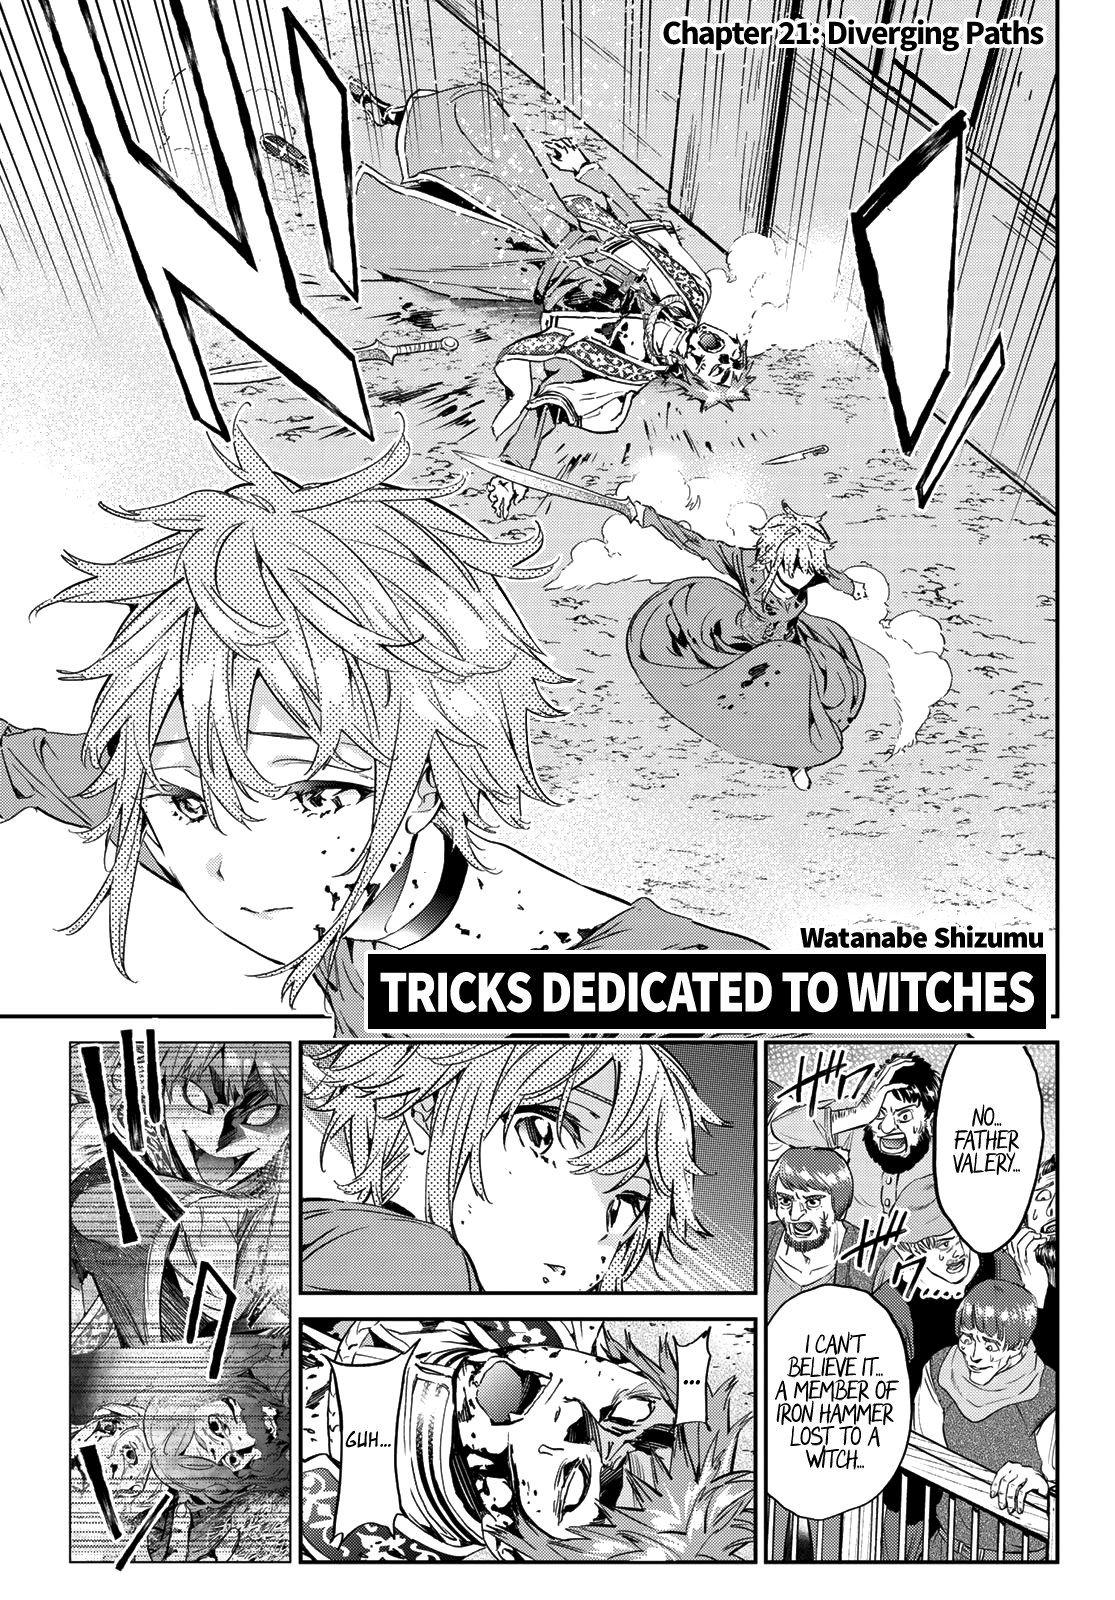 Tricks Dedicated To Witches - Page 2